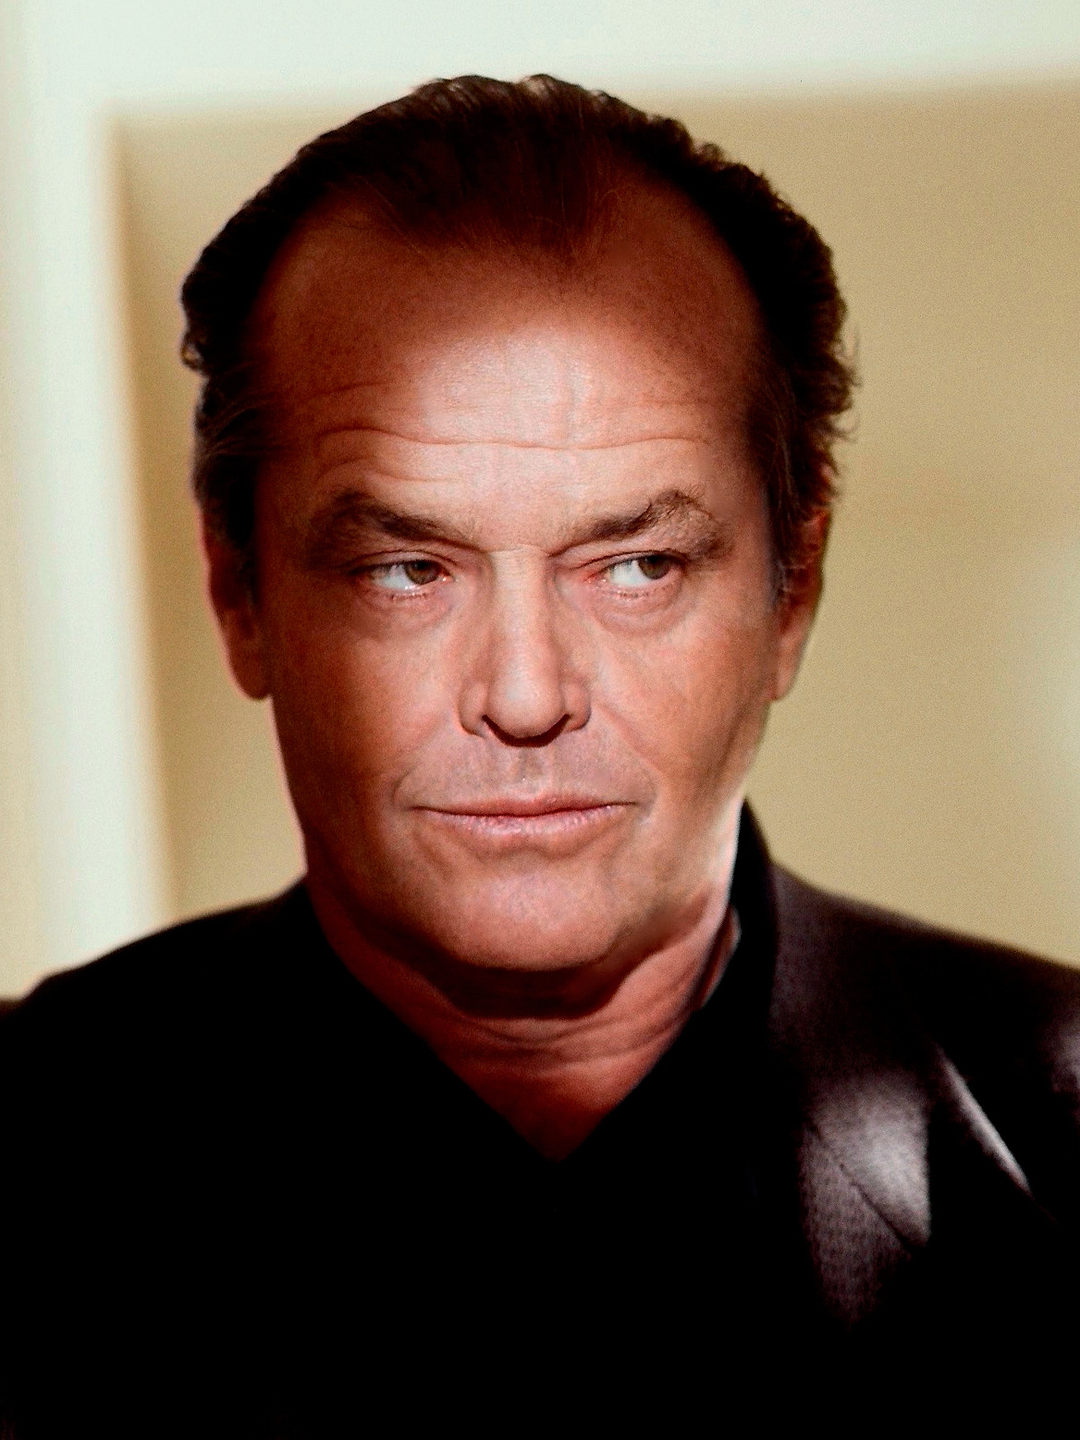 Jack Nicholson how did he became famous